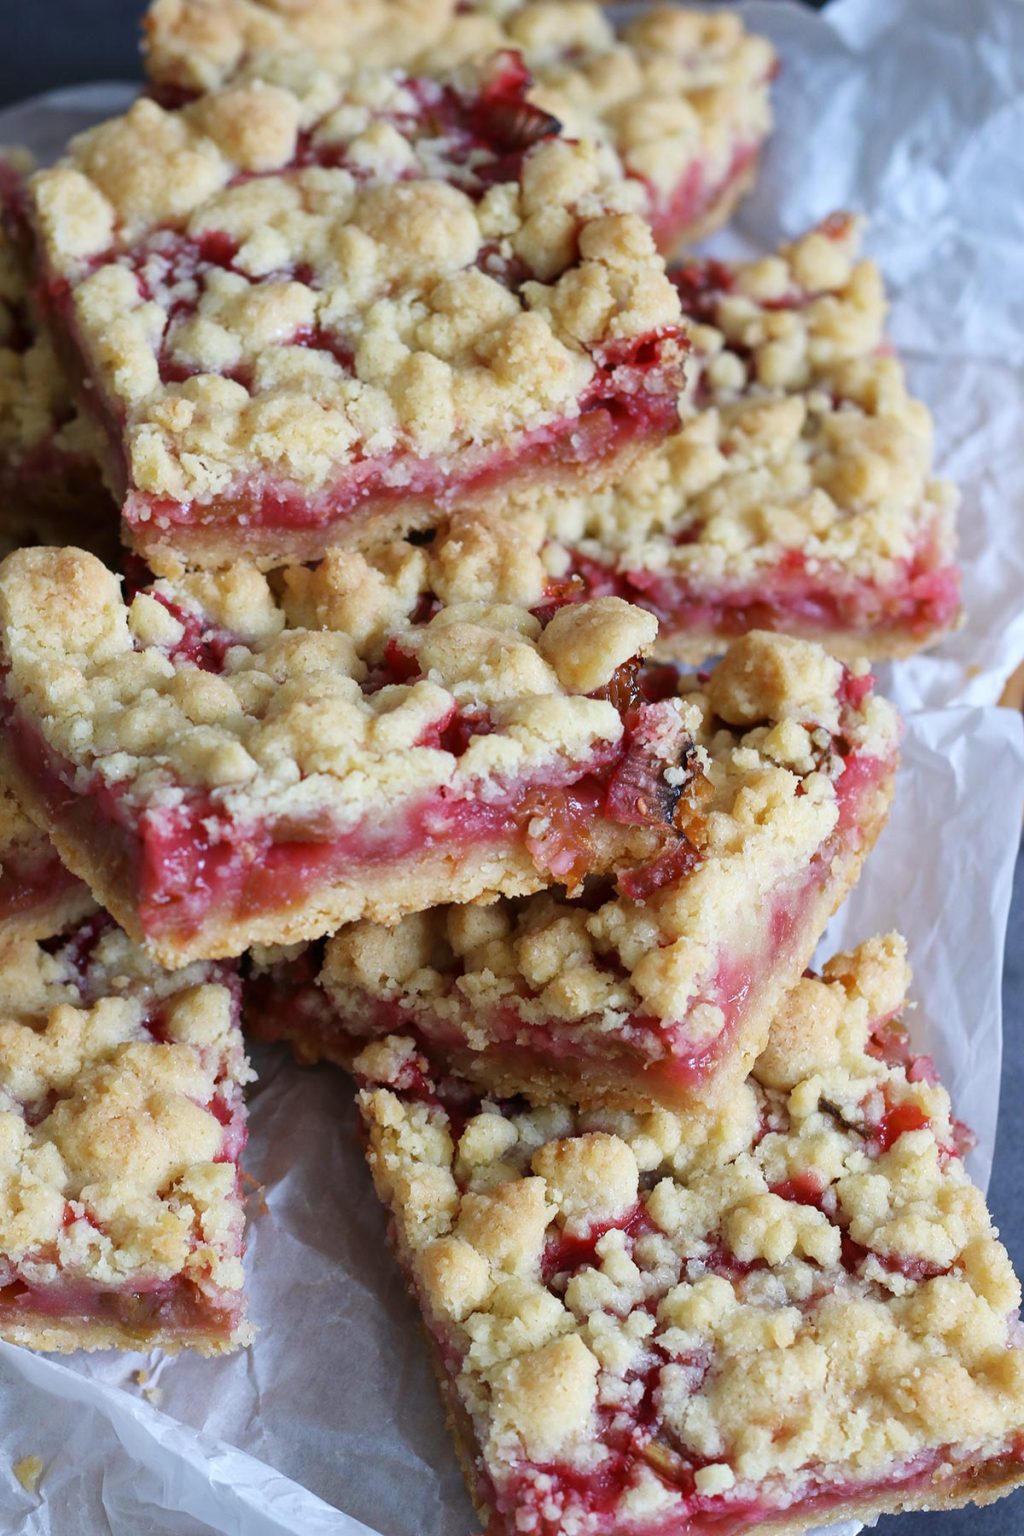 Rhubarb Shortbread Streusel Bars | Bake to the roots